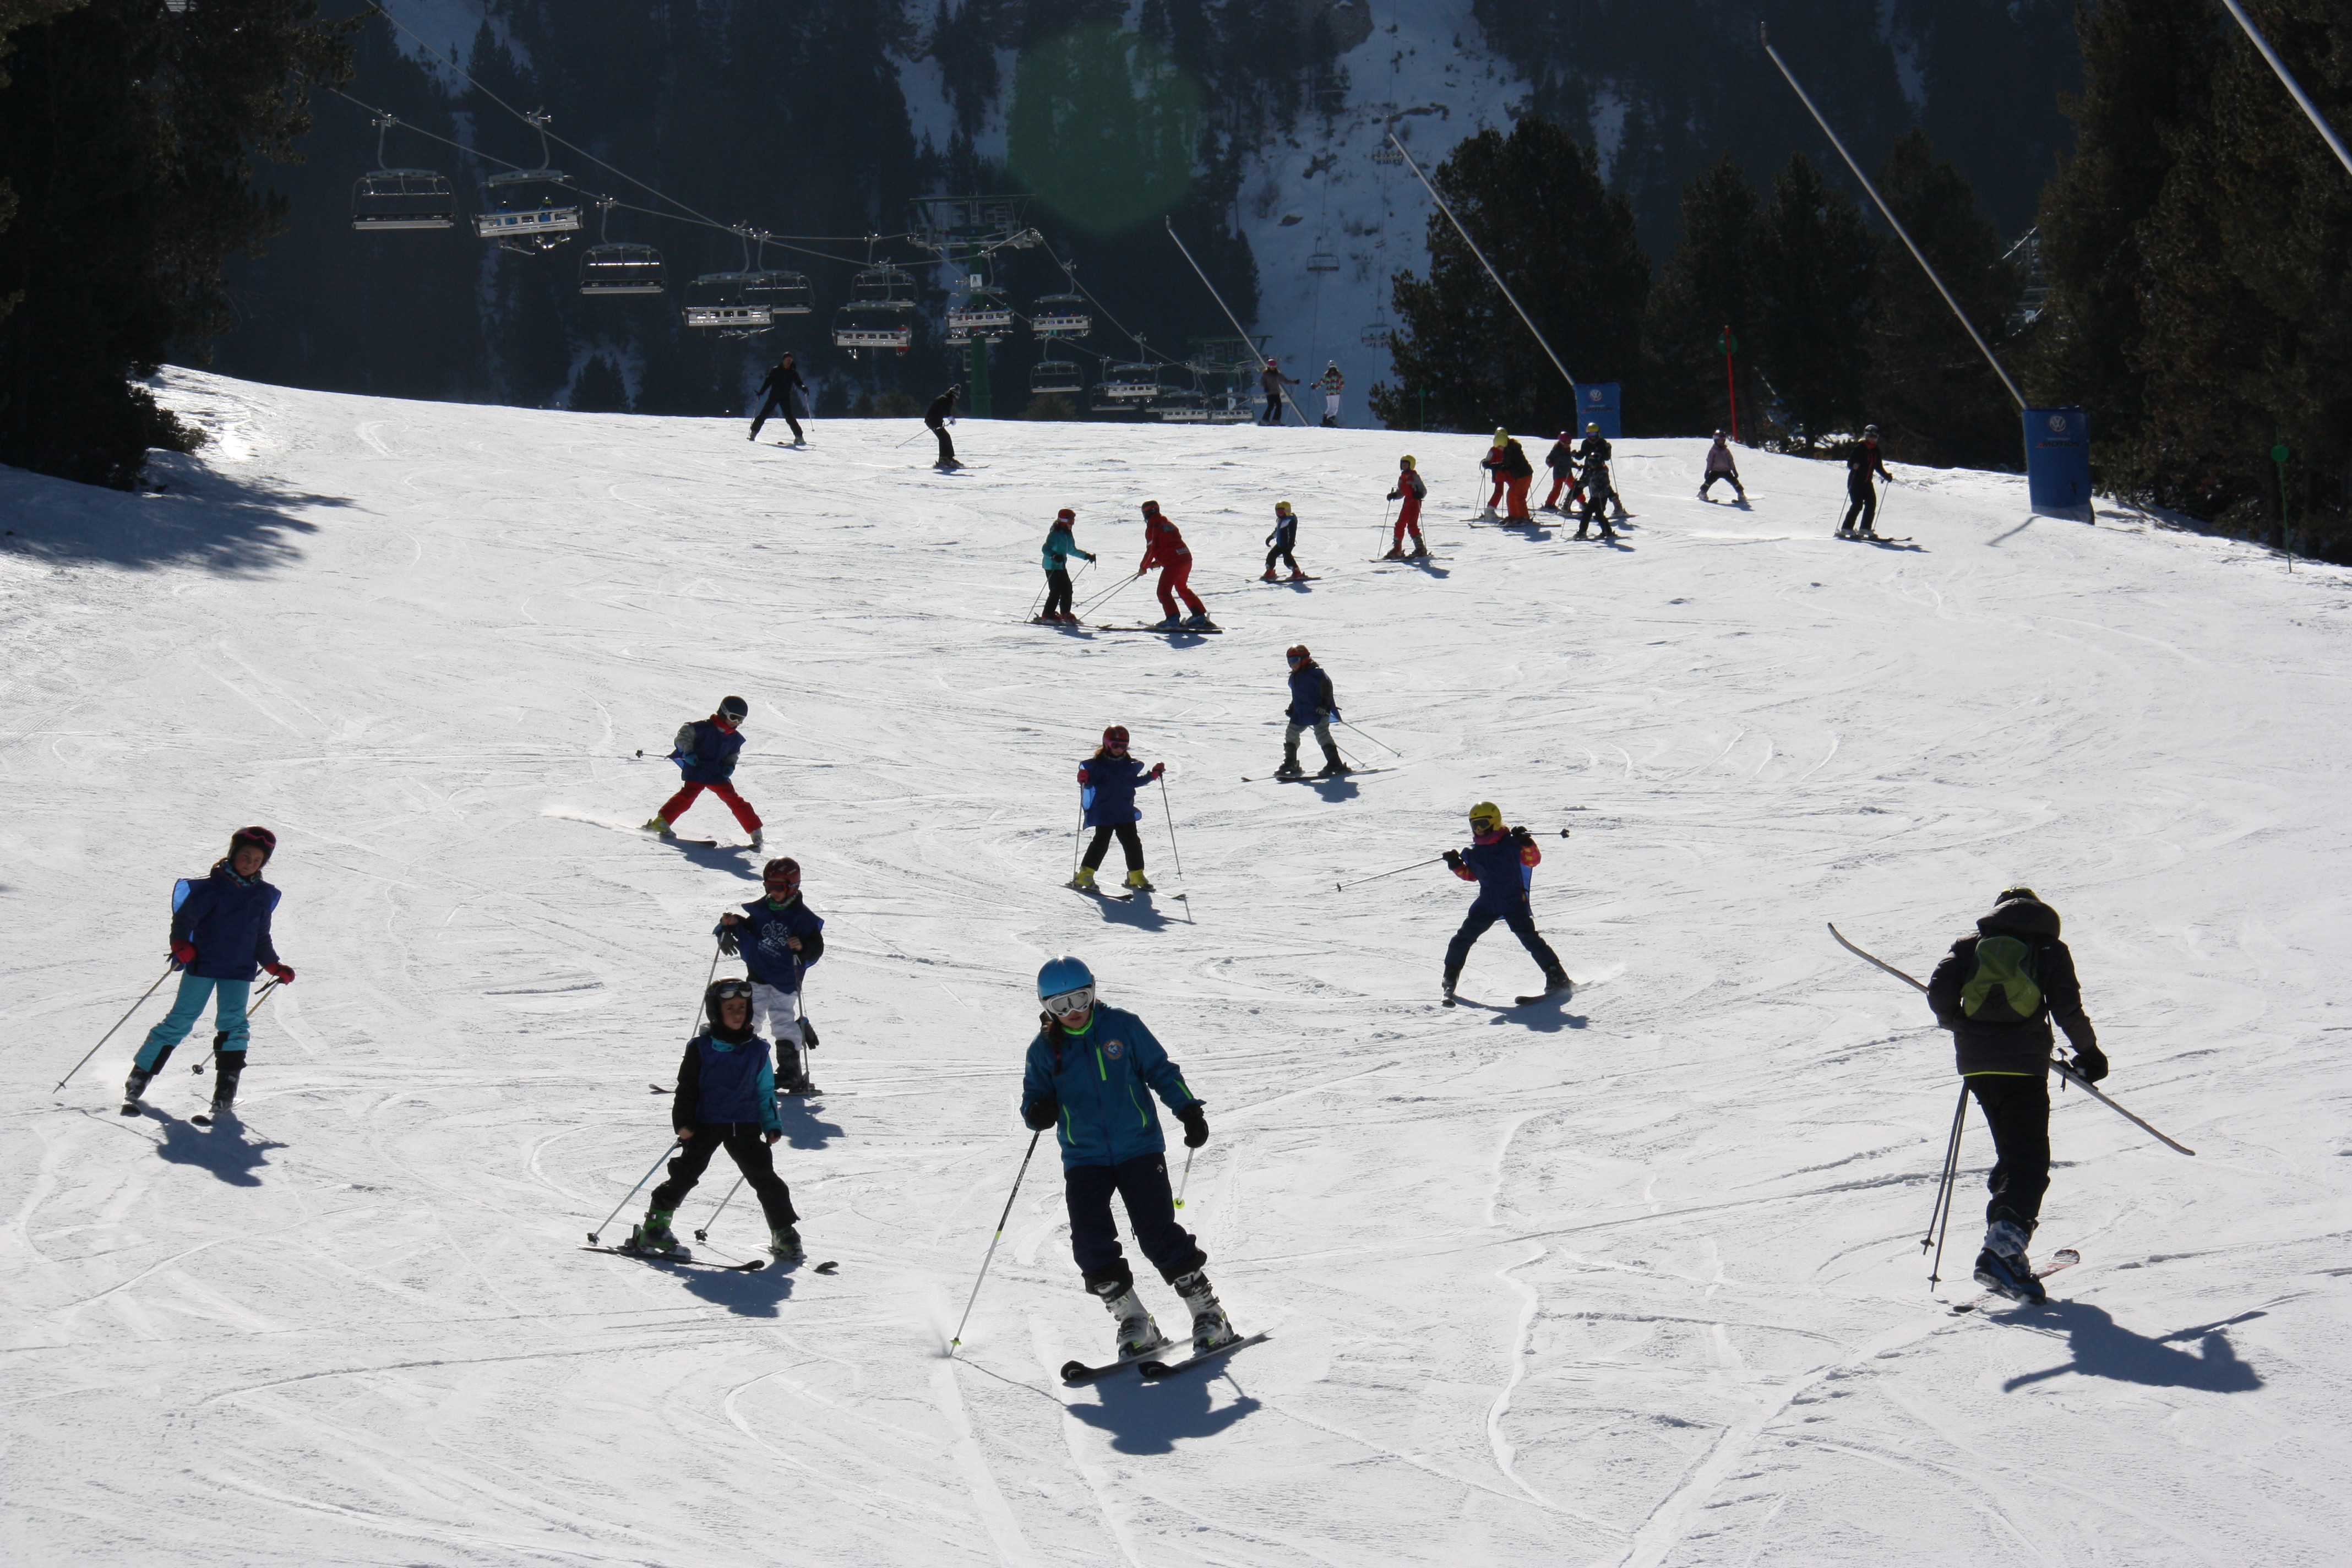 Various skiers on one of the pistes at La Molina station on February 23 2018 (by Albert Lijarcio)